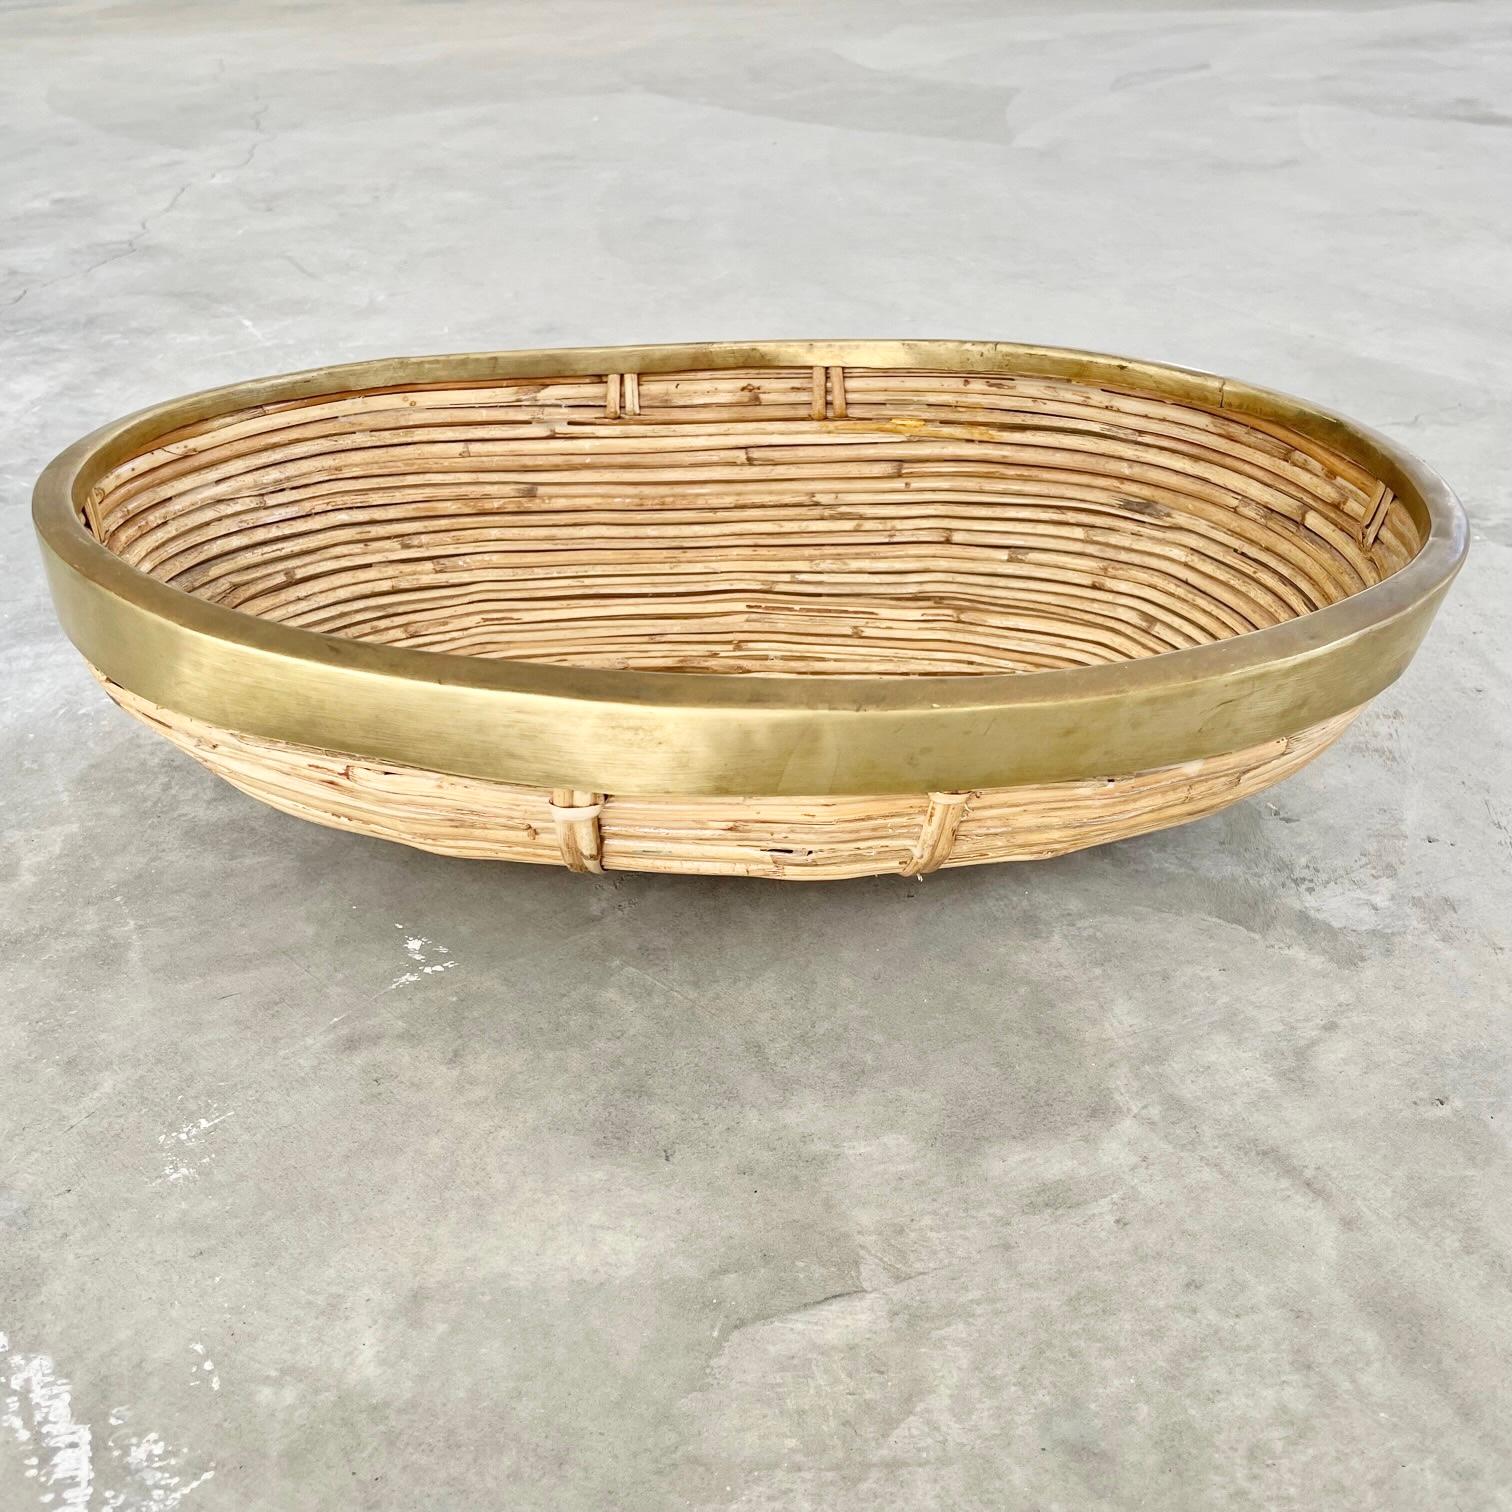 Mid-20th Century Crespi Style Bamboo and Brass Bowl